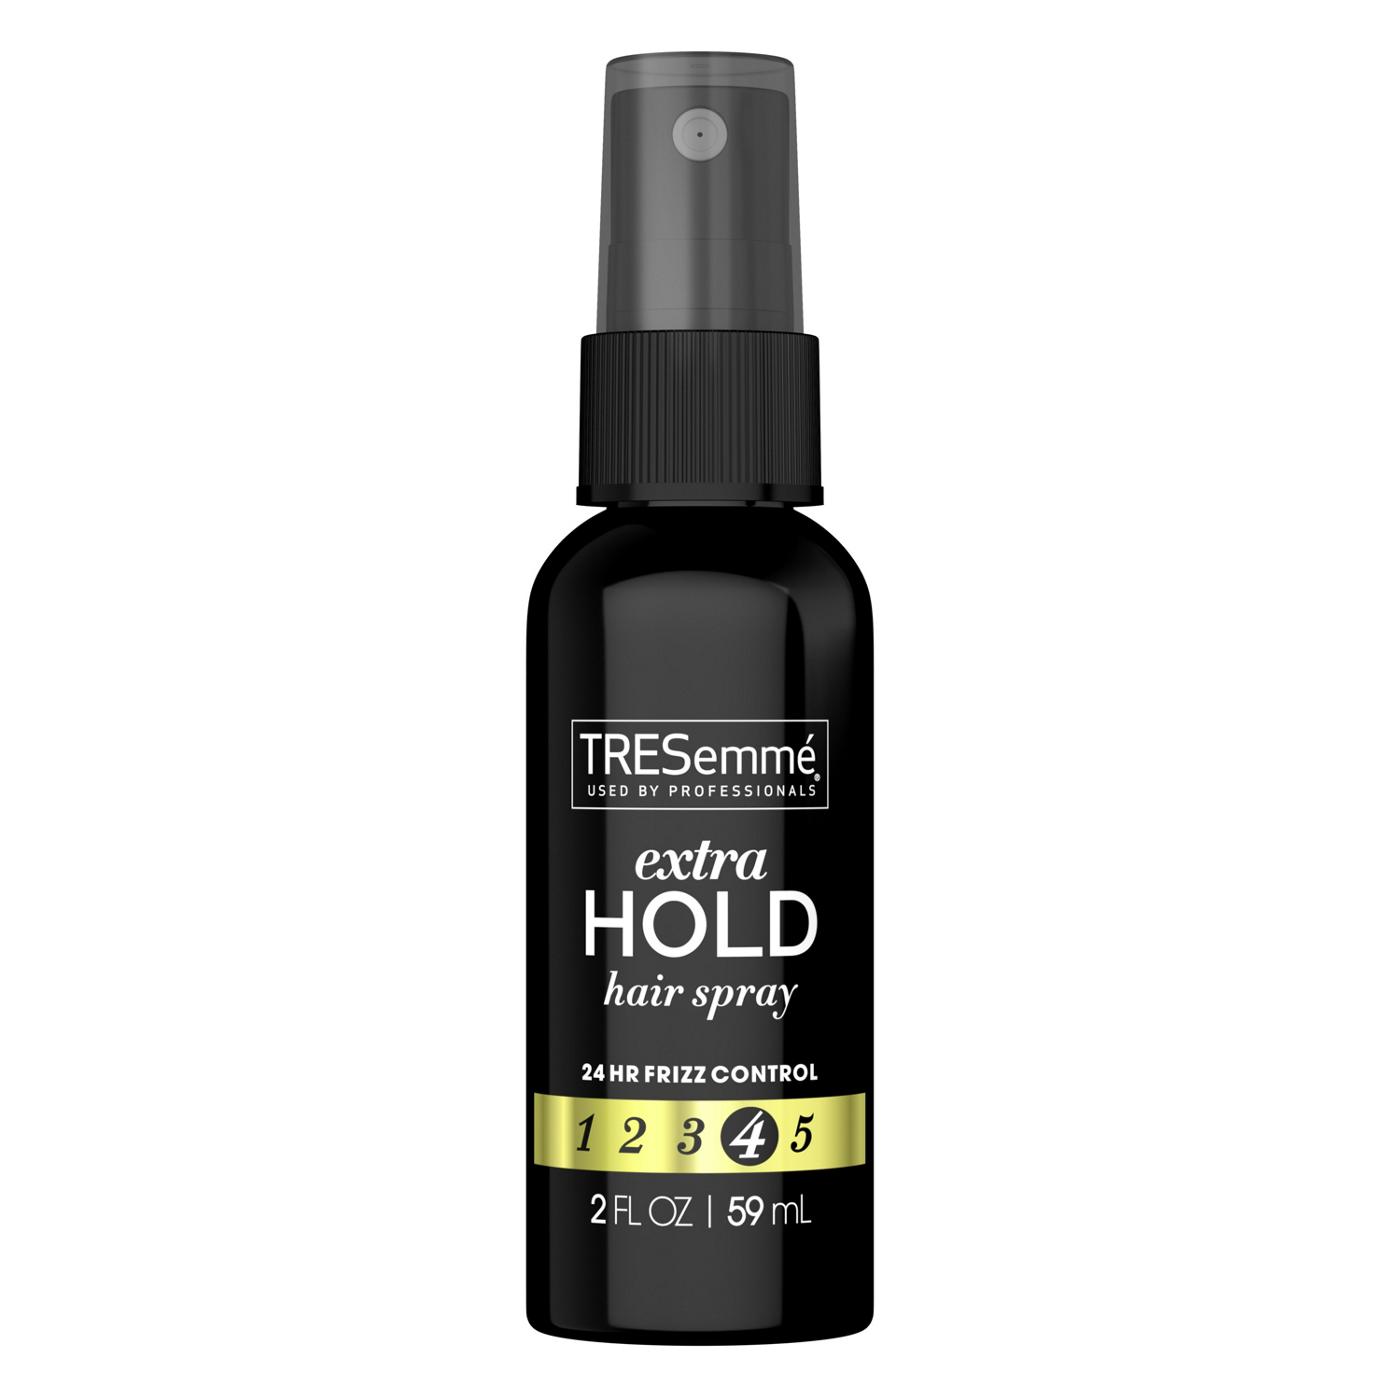 TRESemmé Travel Size TRES Two Extra Hold Hair Spray; image 1 of 2